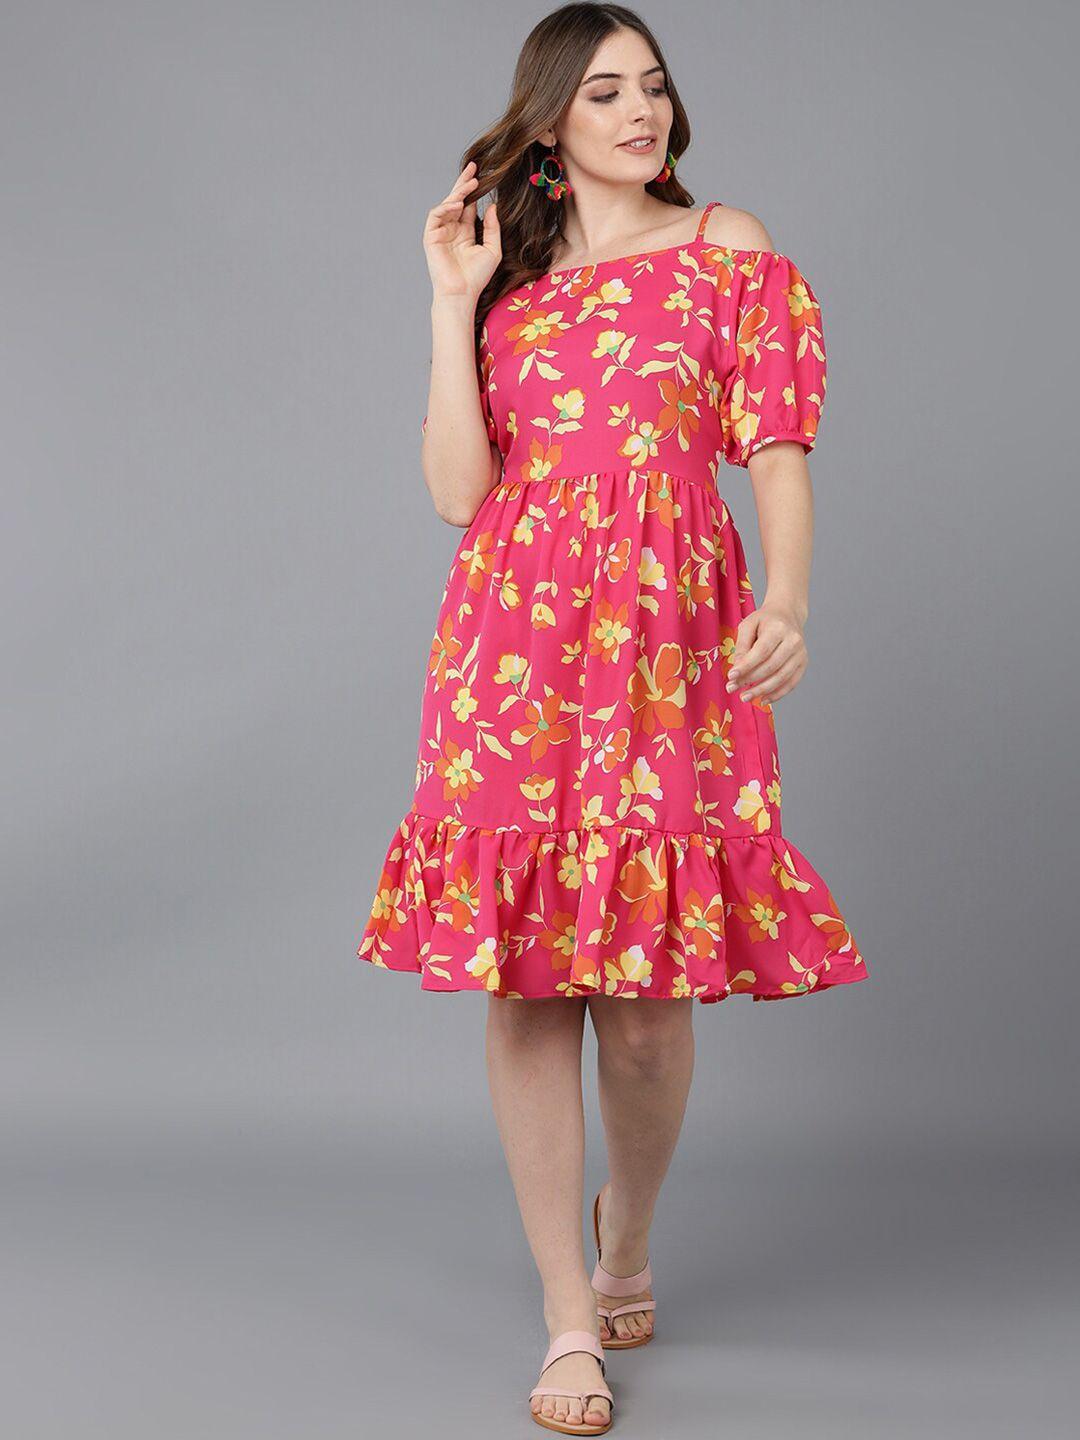 ahika women coral & yellow floral printed off-shoulder fit and flare dress